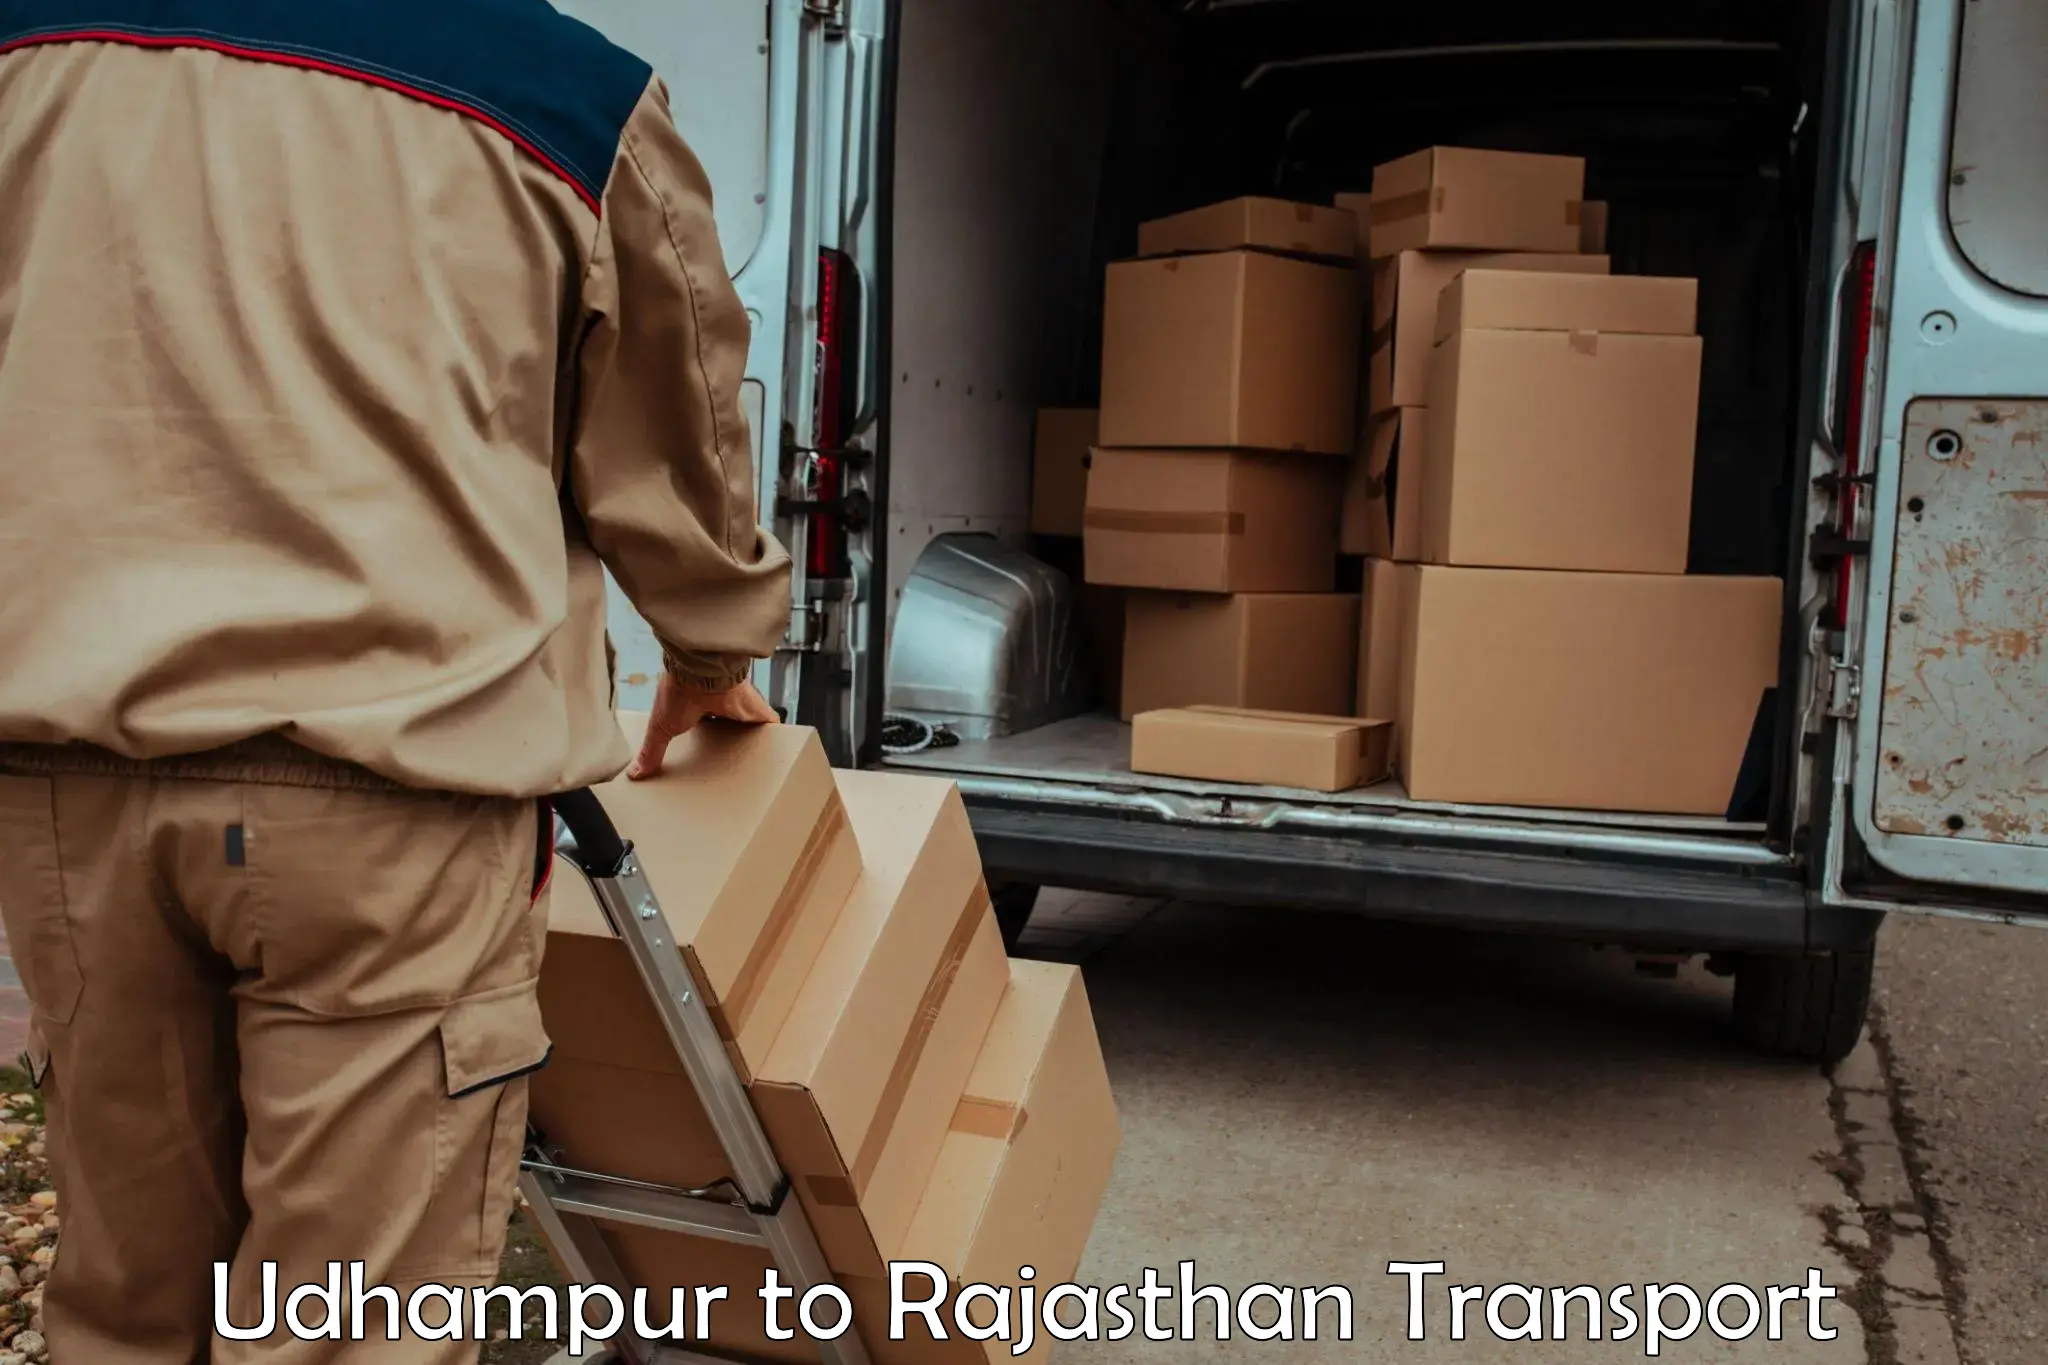 Truck transport companies in India Udhampur to Balotra